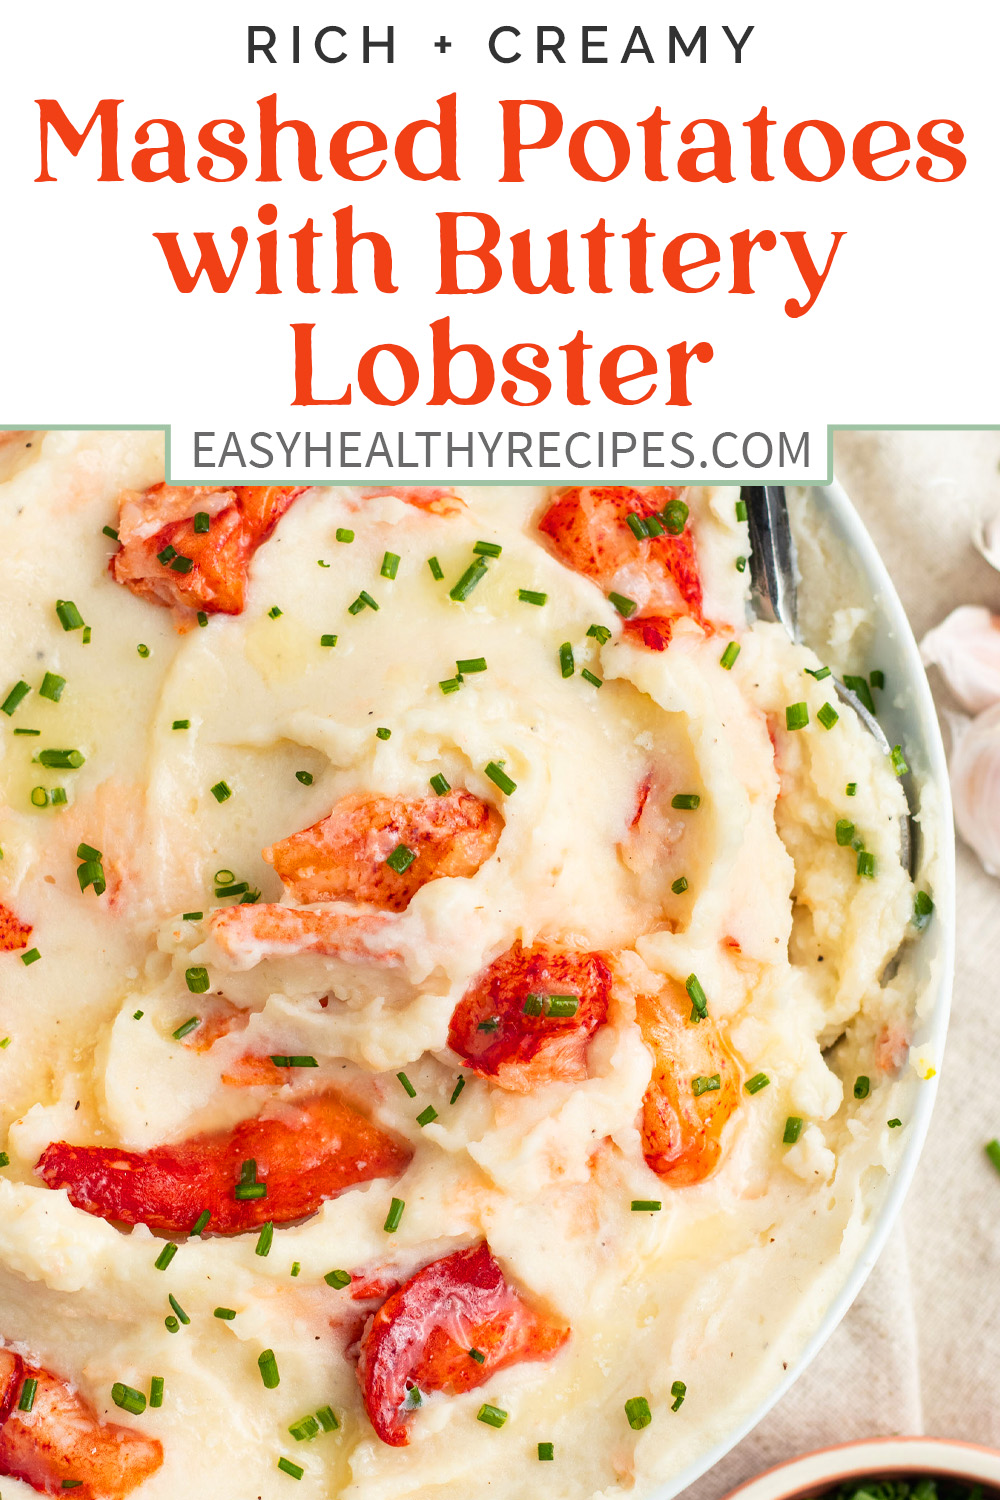 Pin graphic for lobster mashed potatoes.